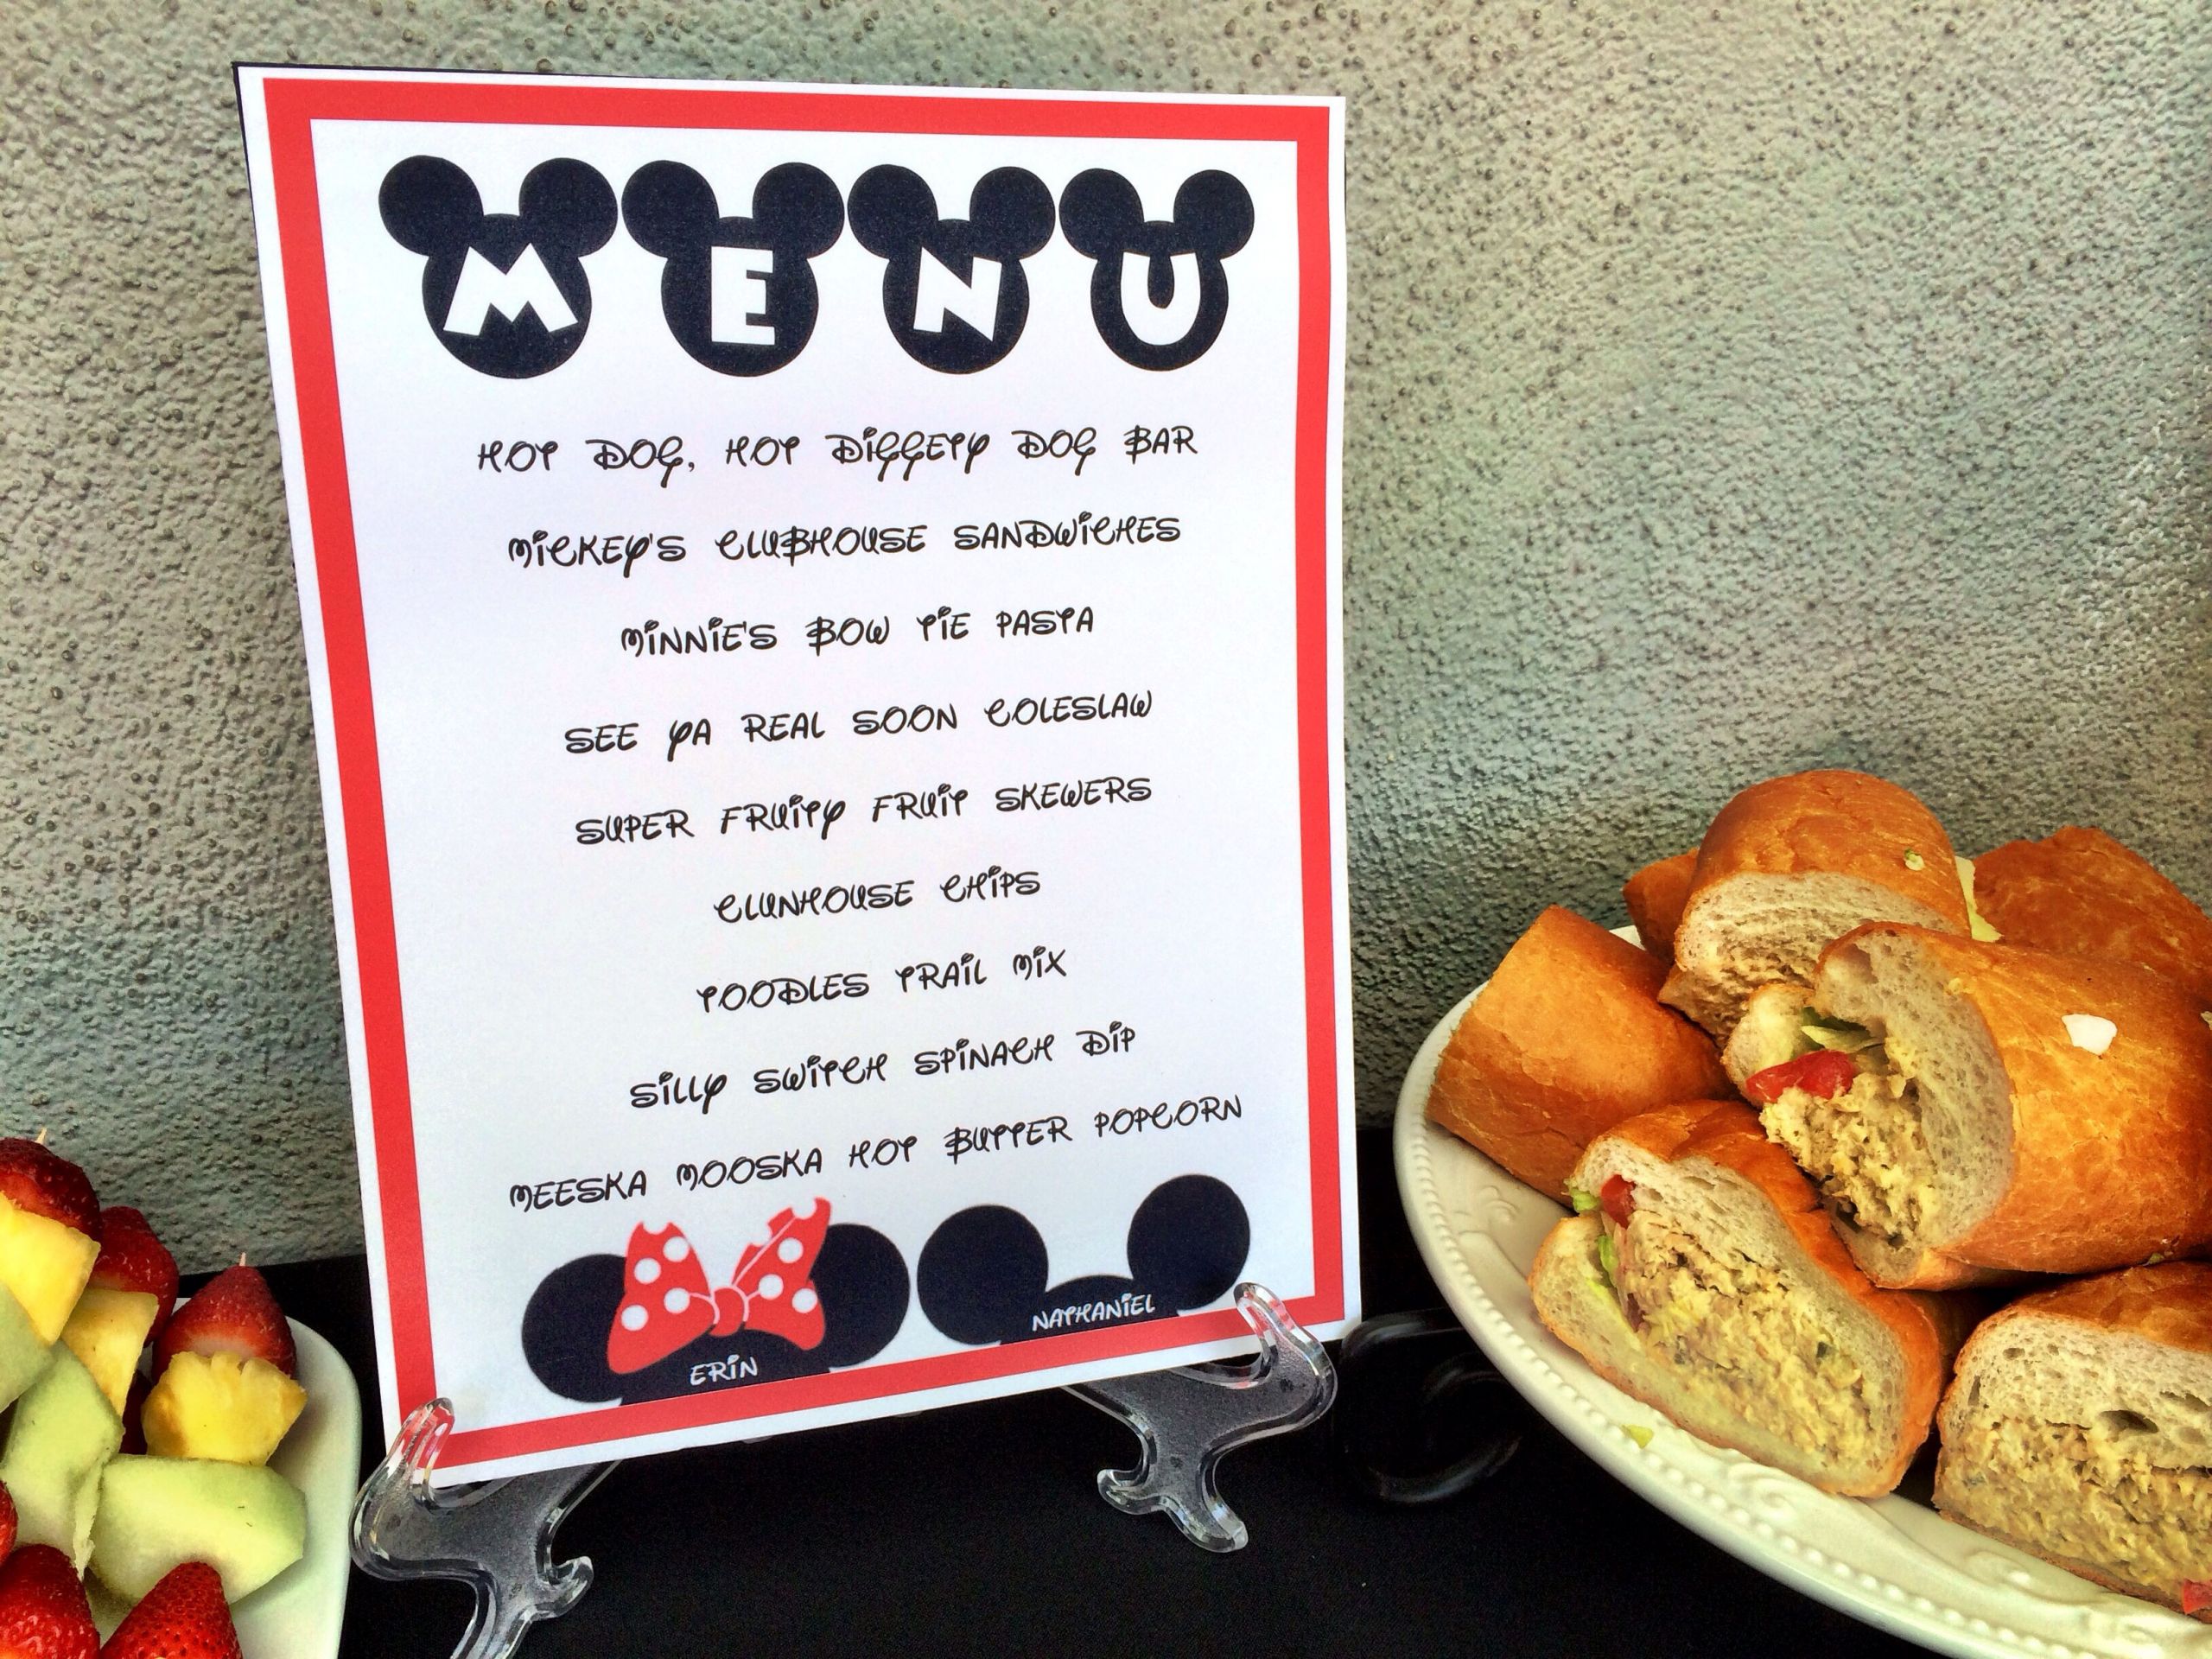 Mickey Mouse 1St Birthday Party Food Ideas
 Mickey & Minnie Mouse Birthday Party Food Menu